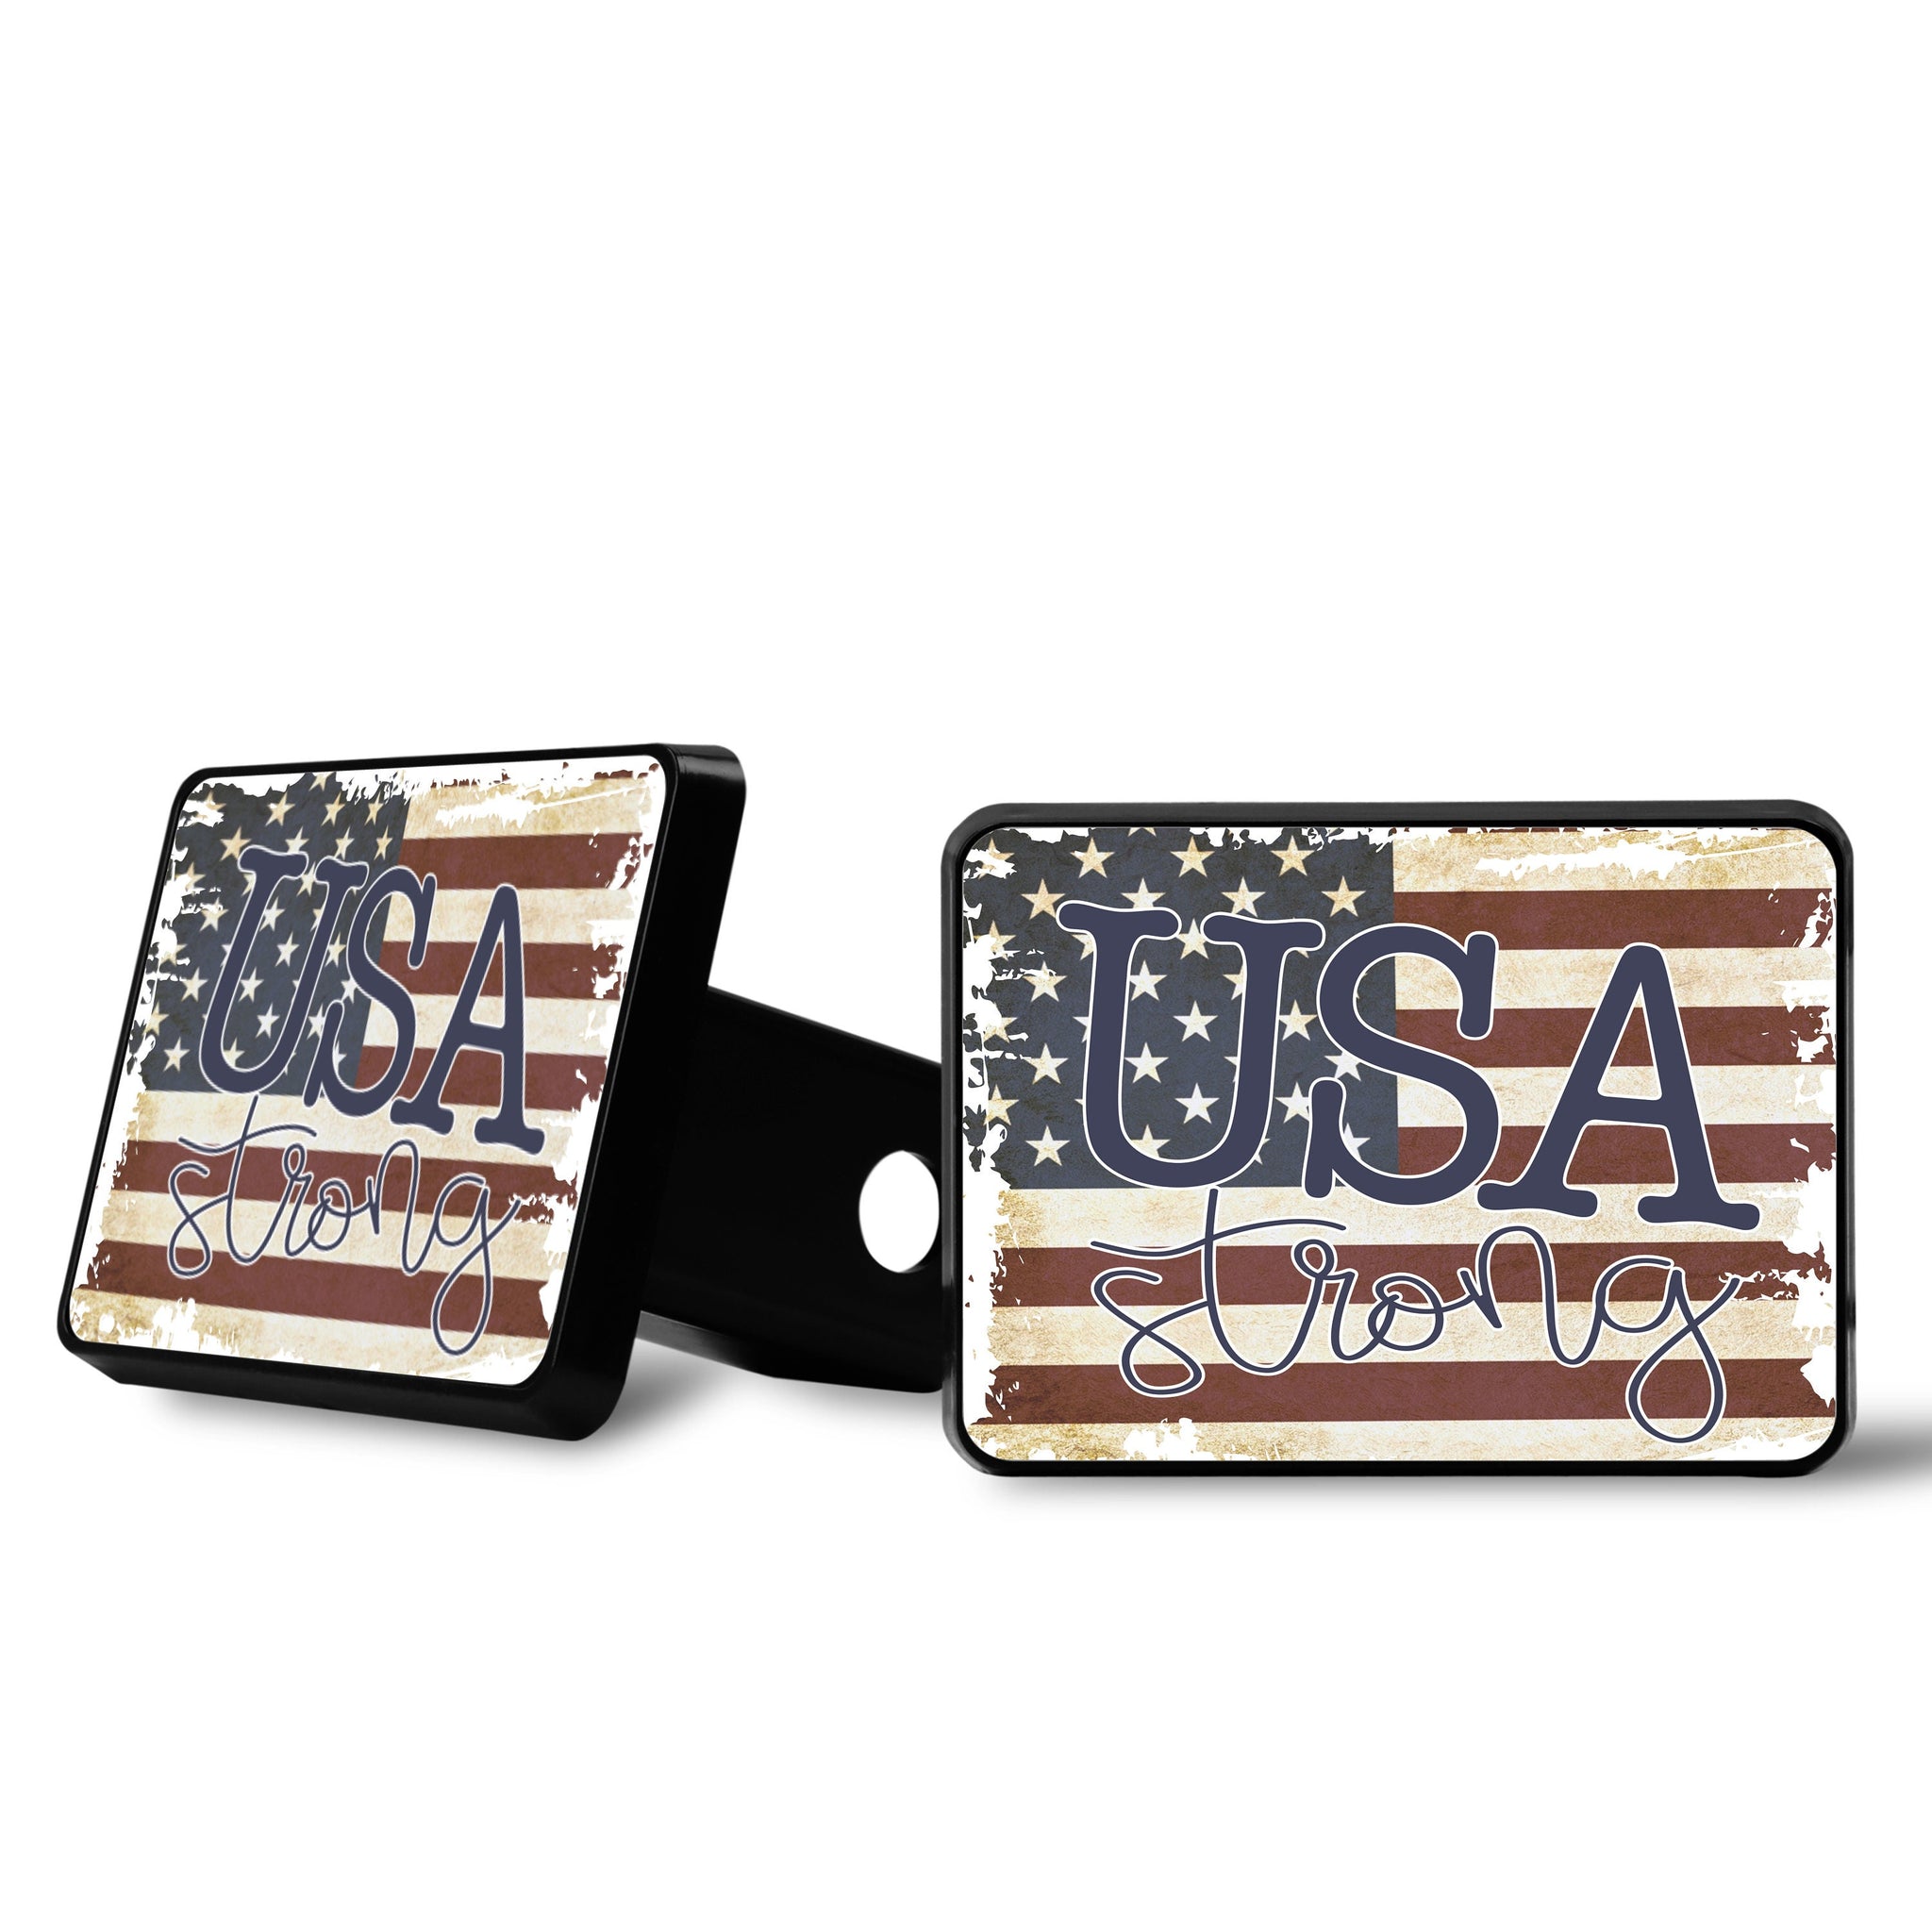 Trailer Hitch Covers, USA Hitch Cover, Patriotic Hitch, American Flag Hitch, Car Accessories, Car Decor, SUV Hitch Inserts, USA Strong Hitch